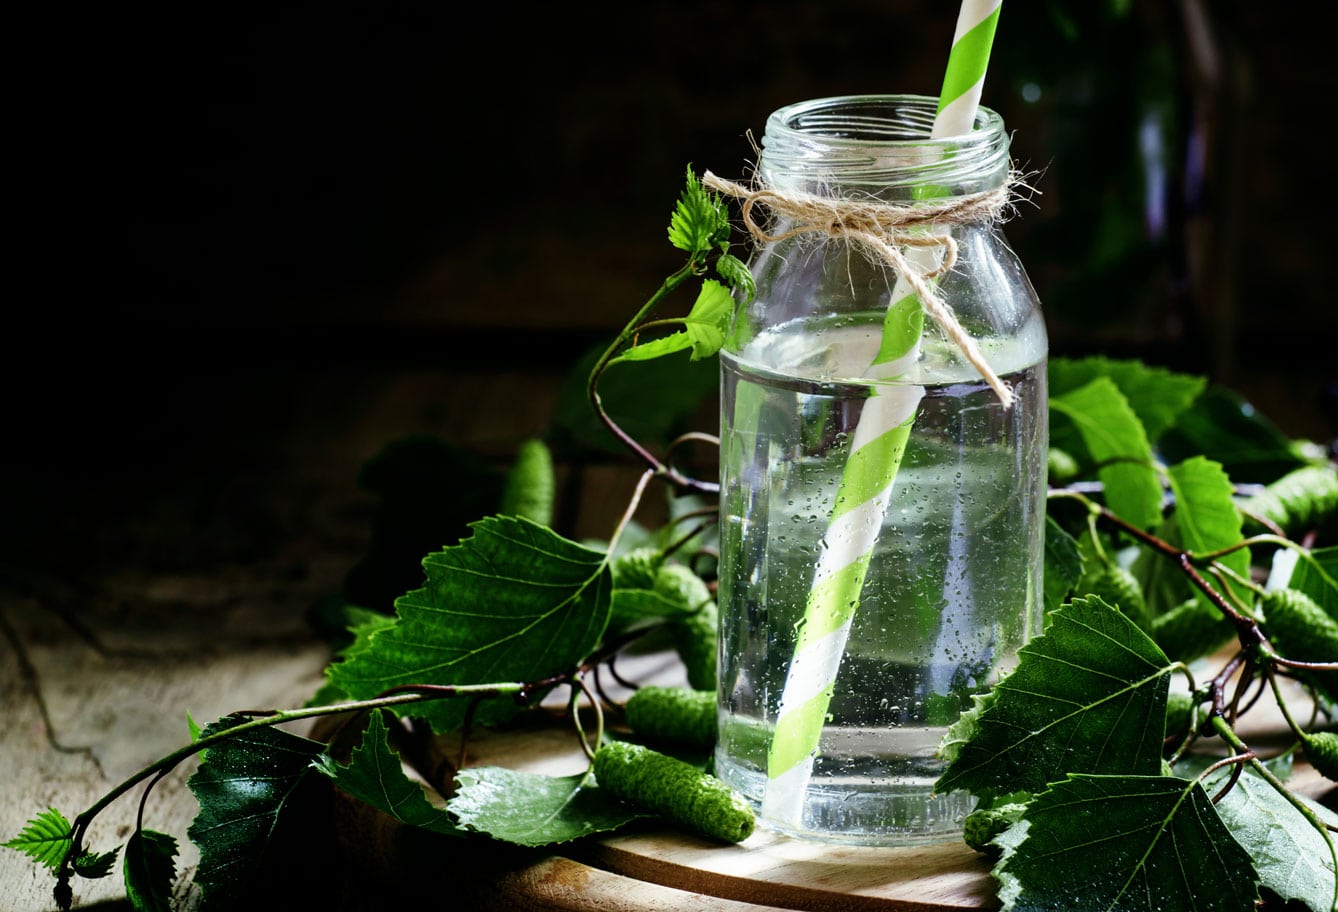 Birch sap - Detox cure to help you lose weight?